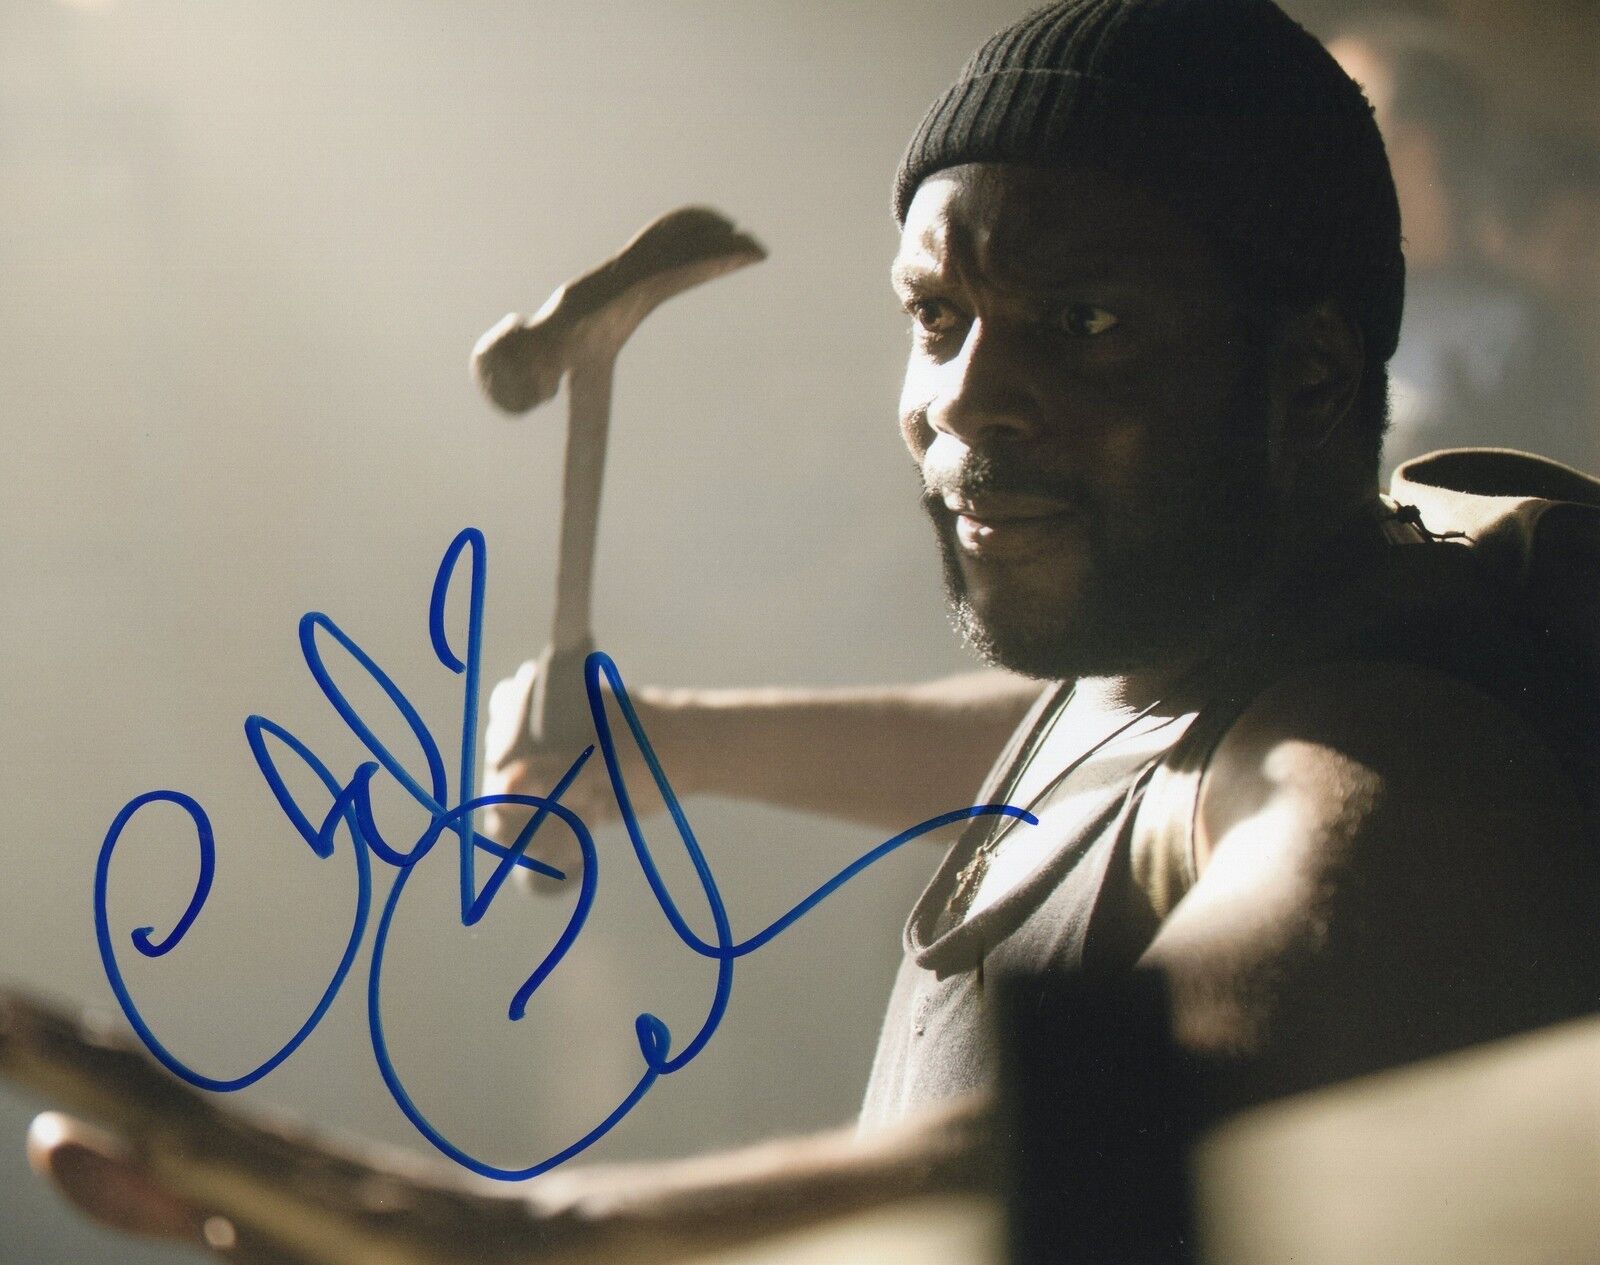 Chad L. Coleman The Walking Dead Tyreese Signed 8x10 Photo Poster painting w/COA #7